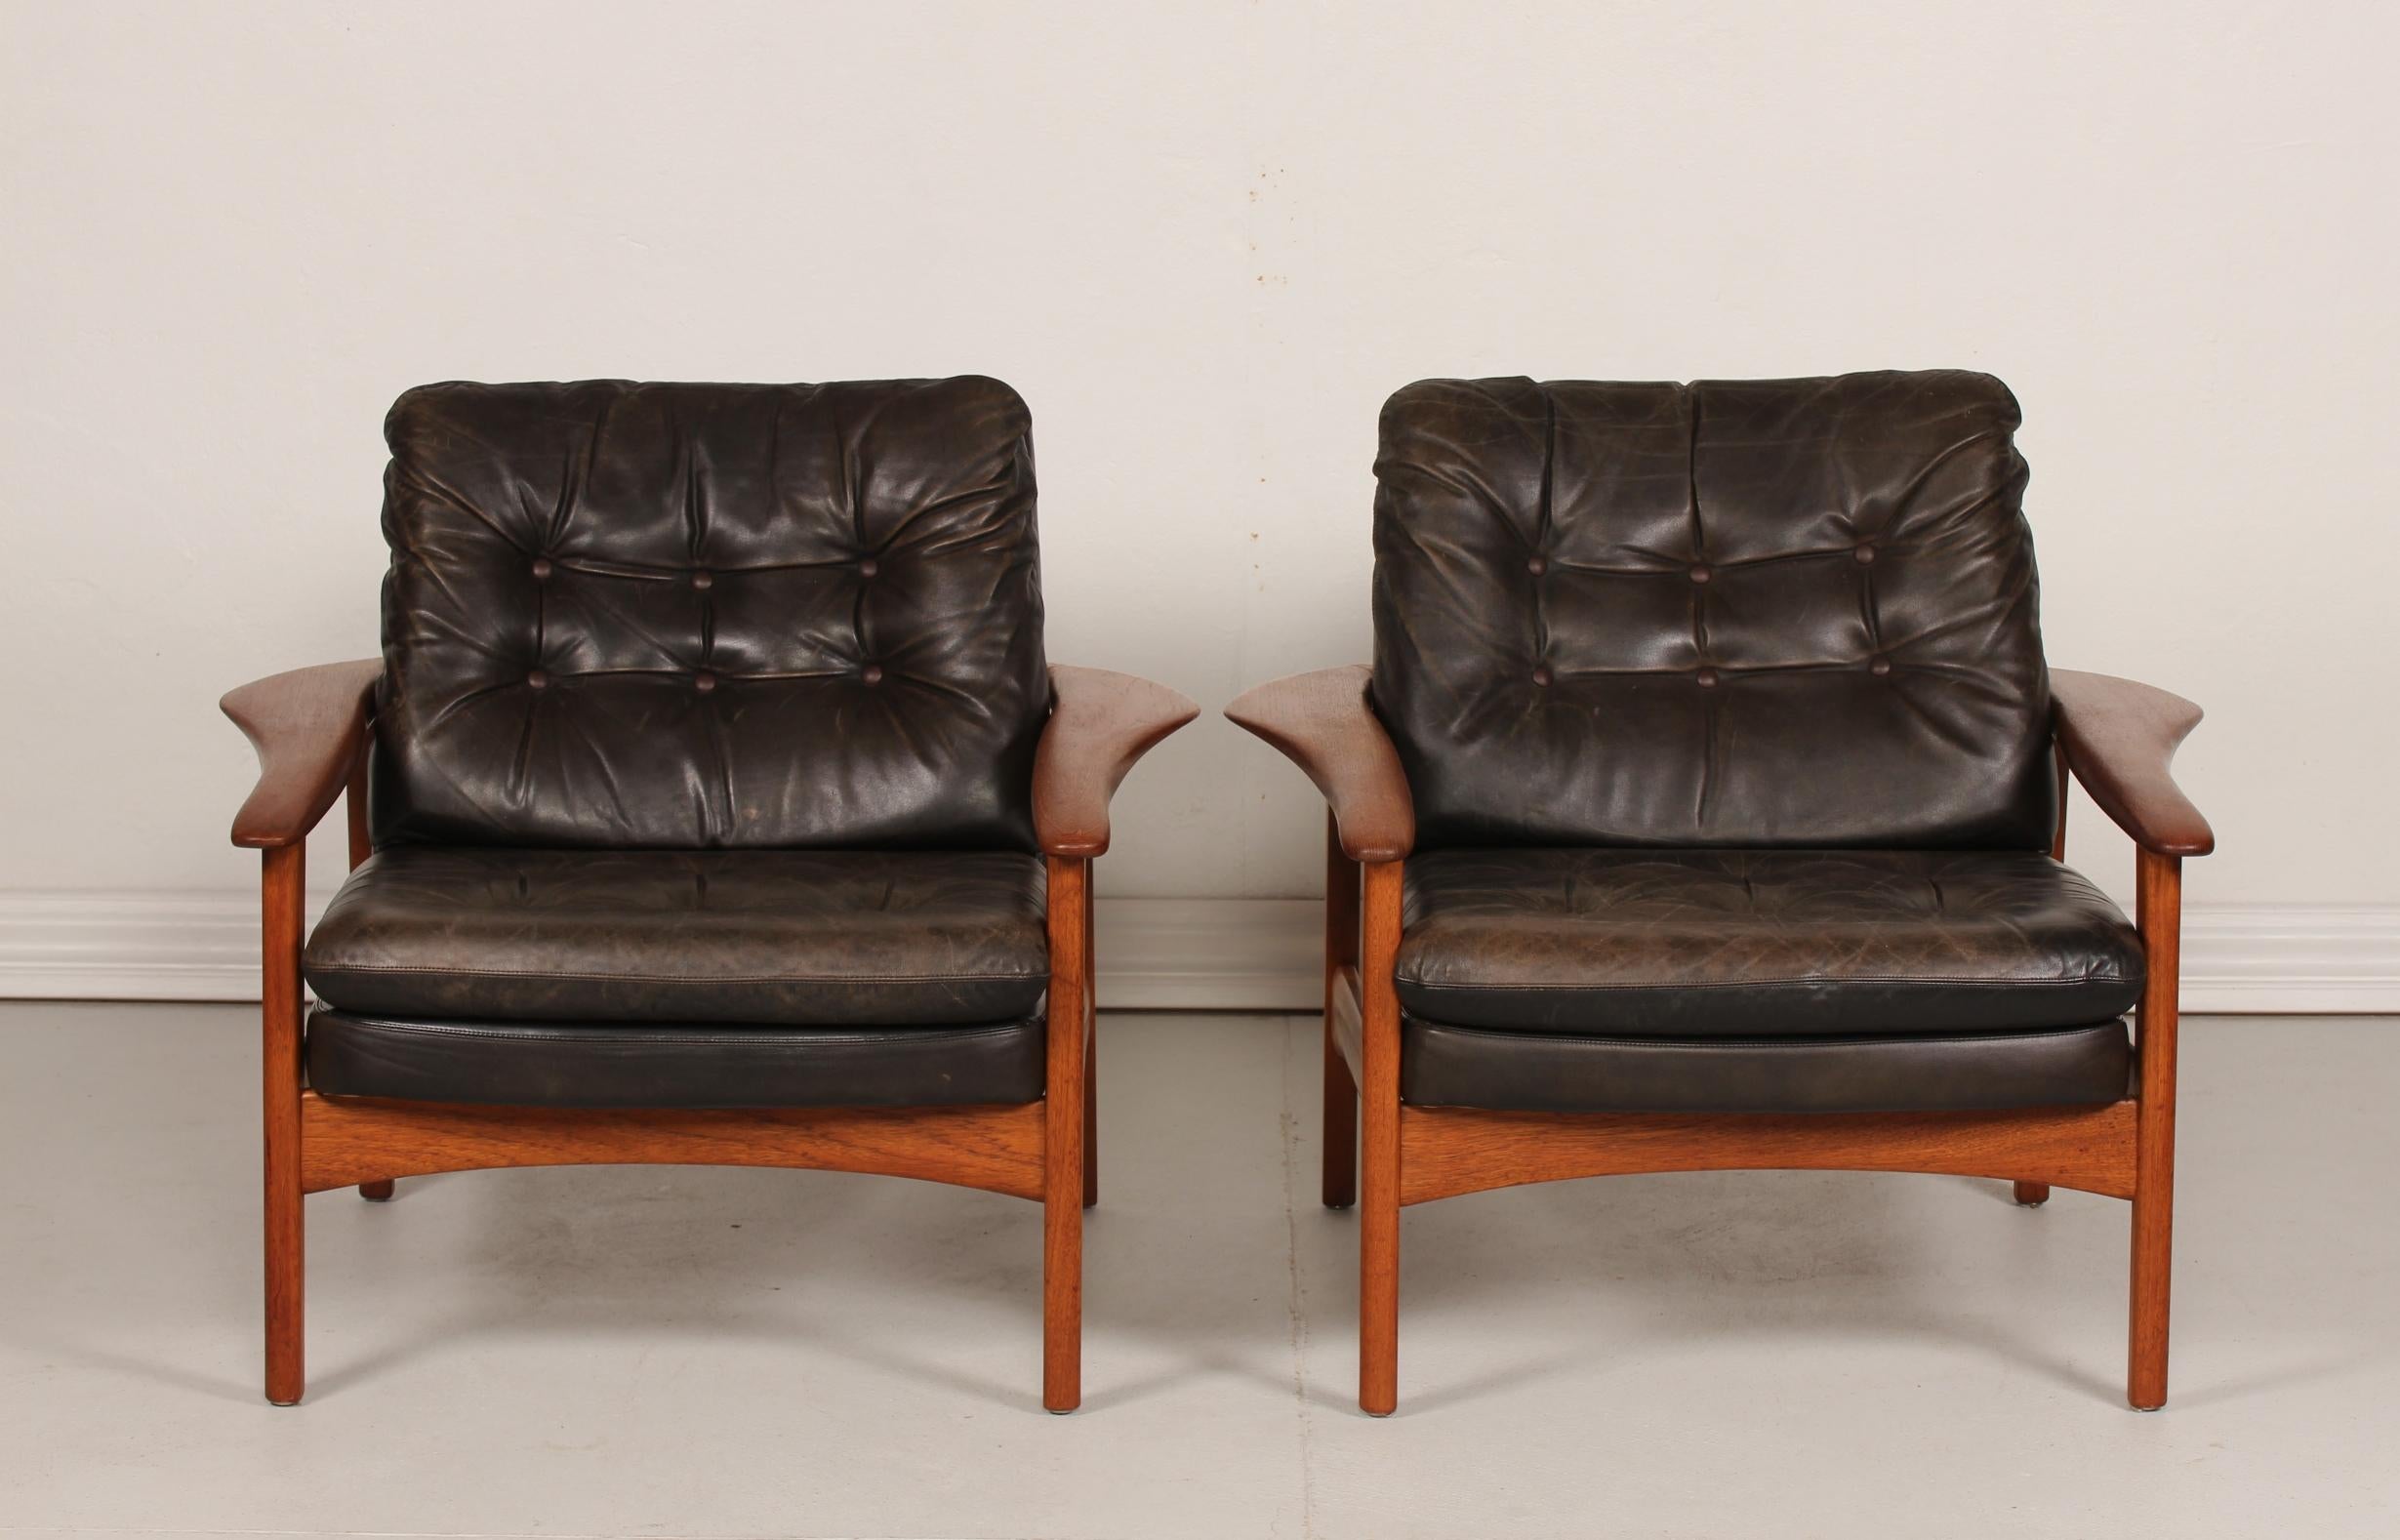 Pair of large vintage lounge chairs attributed to the Danish architect Ib Kofod-Larsen (1921-2003)
They are made of solid teak and have black leather cushions with good patina. The wood has been treated with teak oil.
 